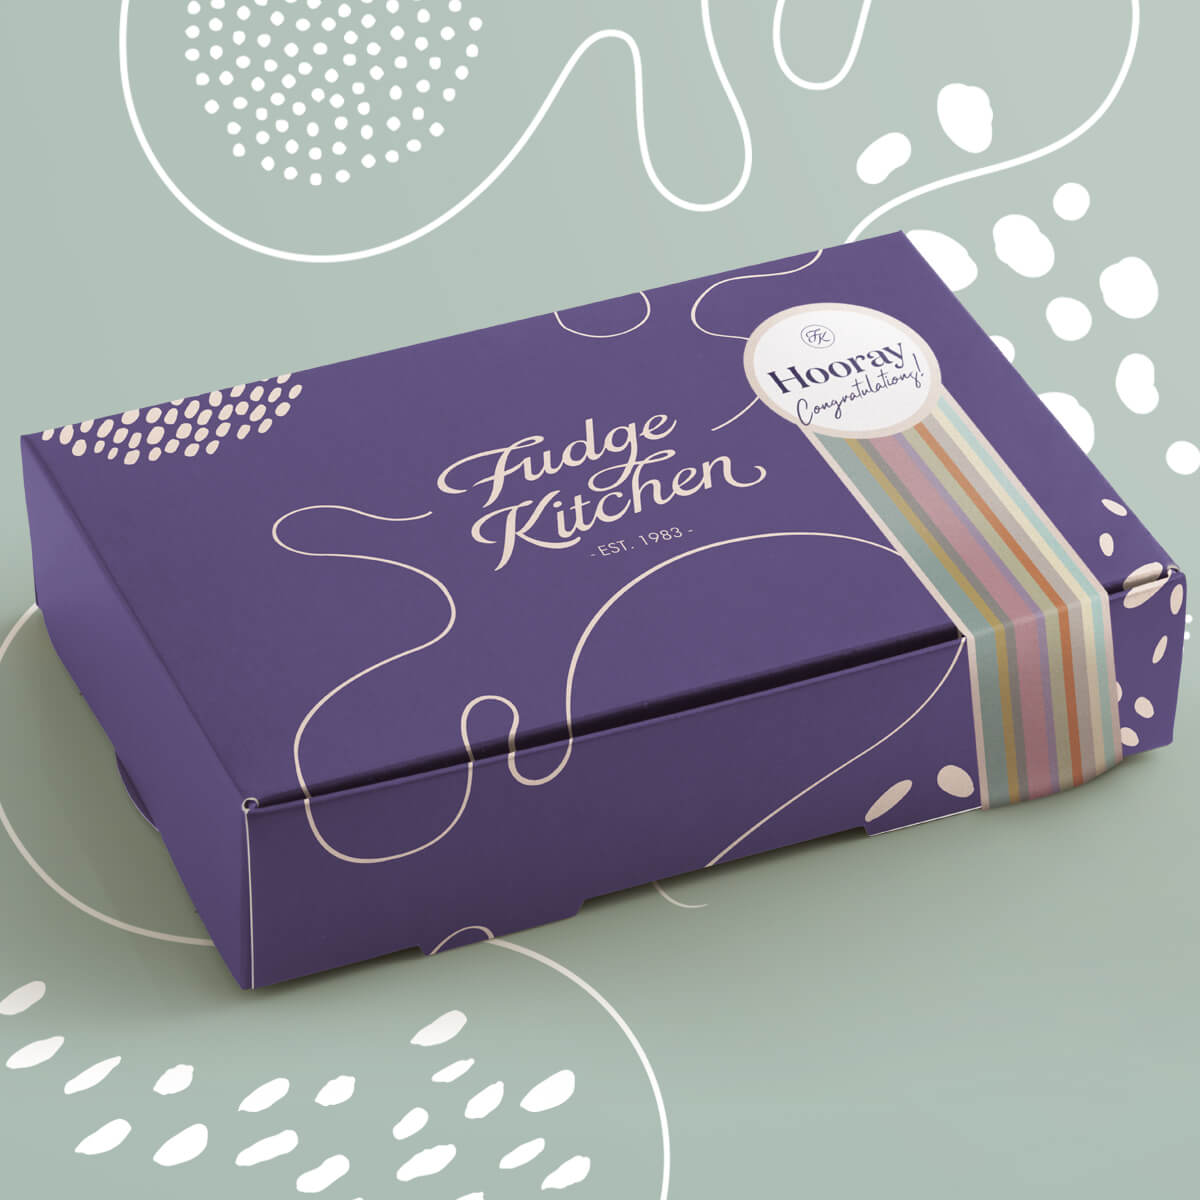 Butter fudge gift box with congratulations band